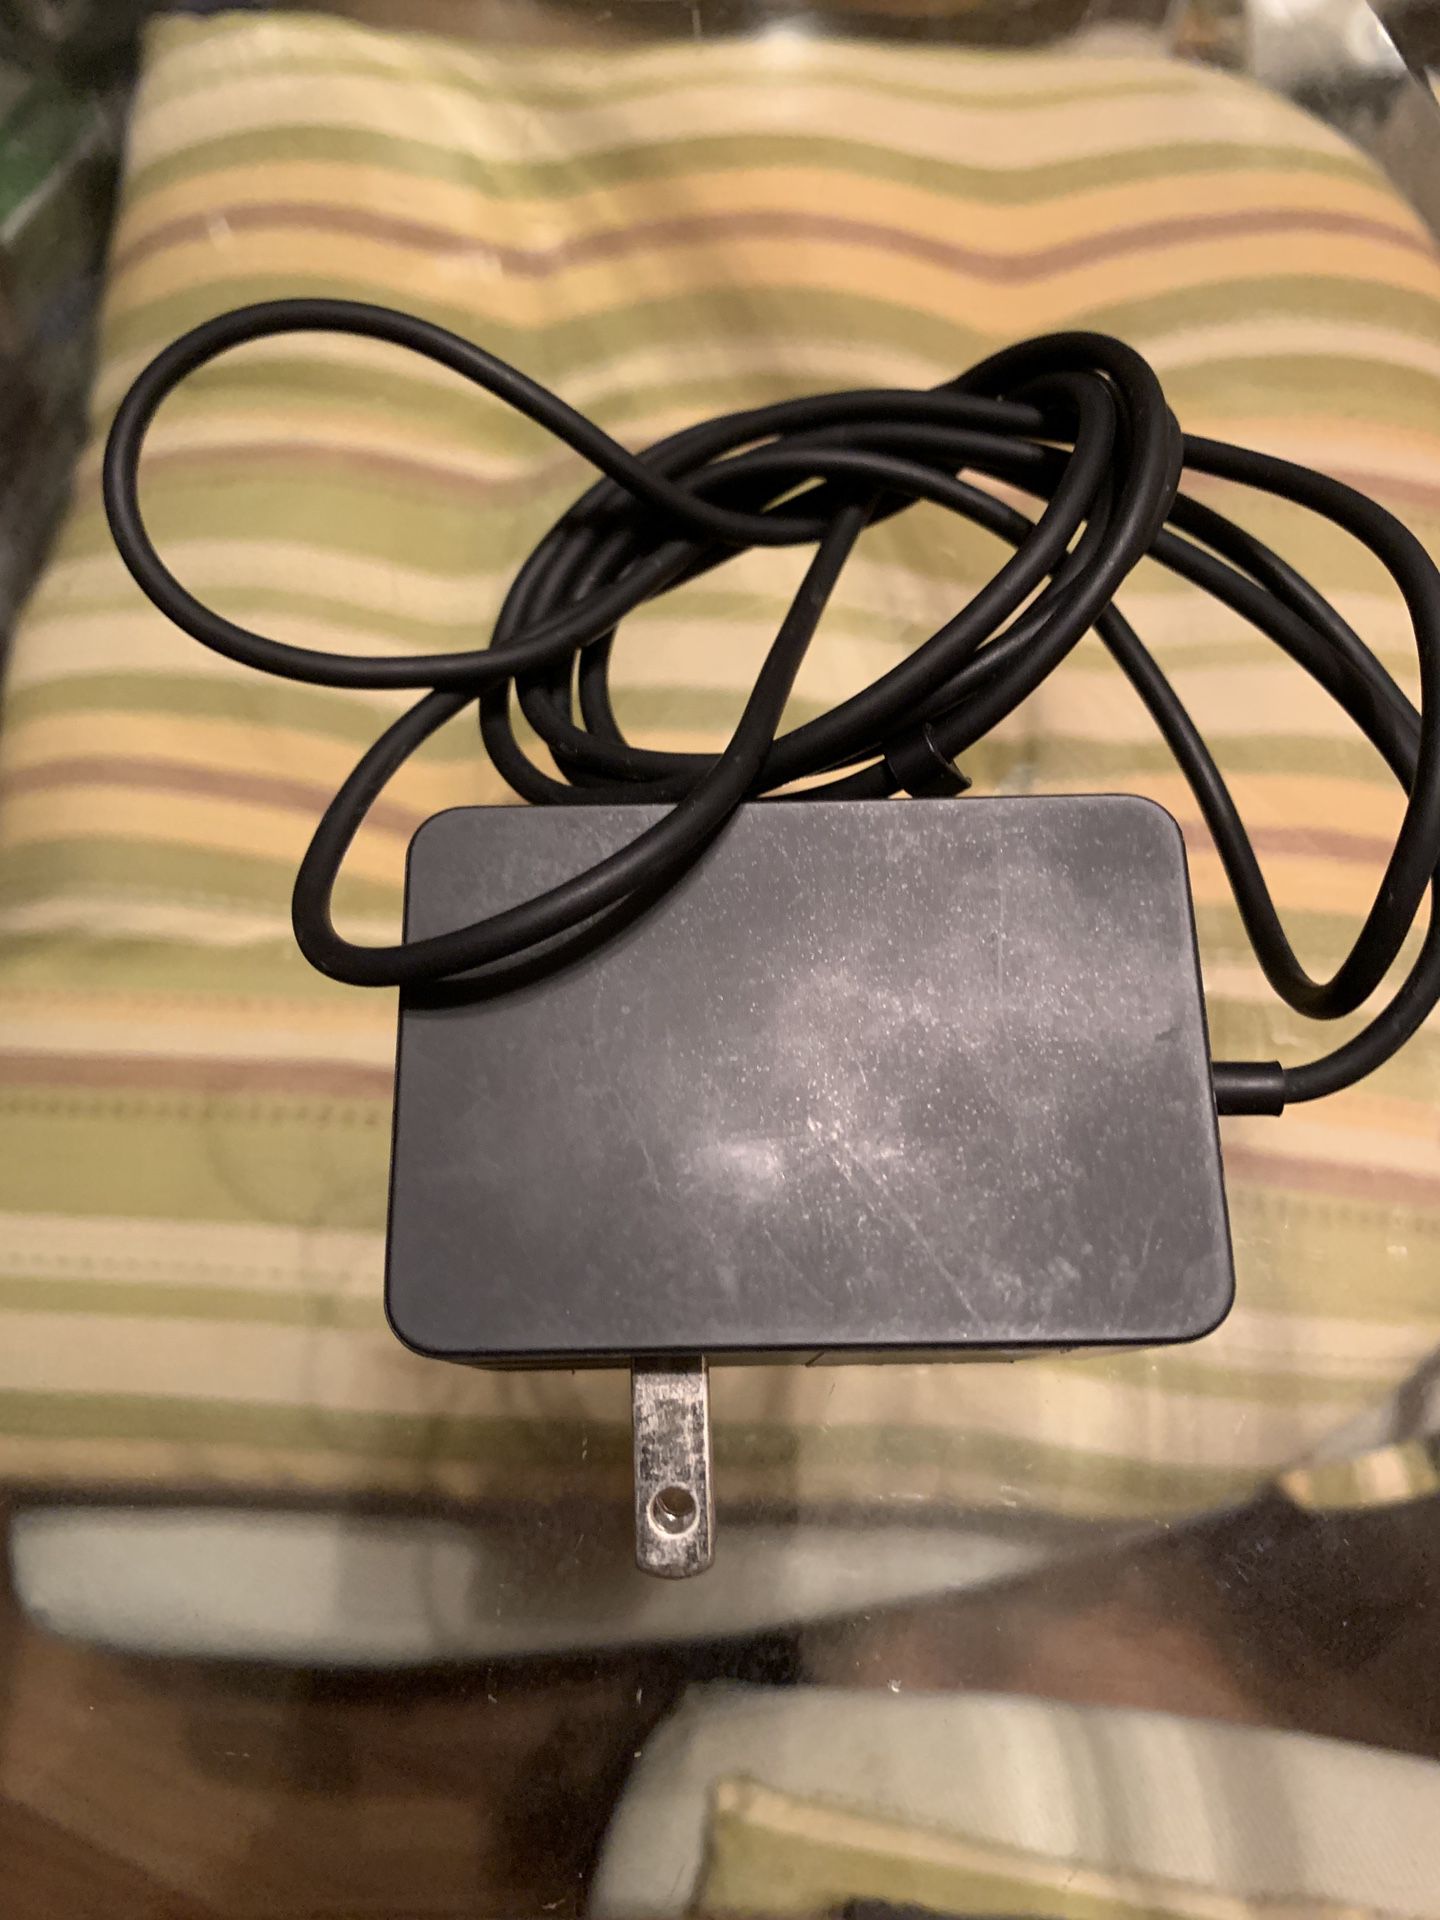 Surface pro charger